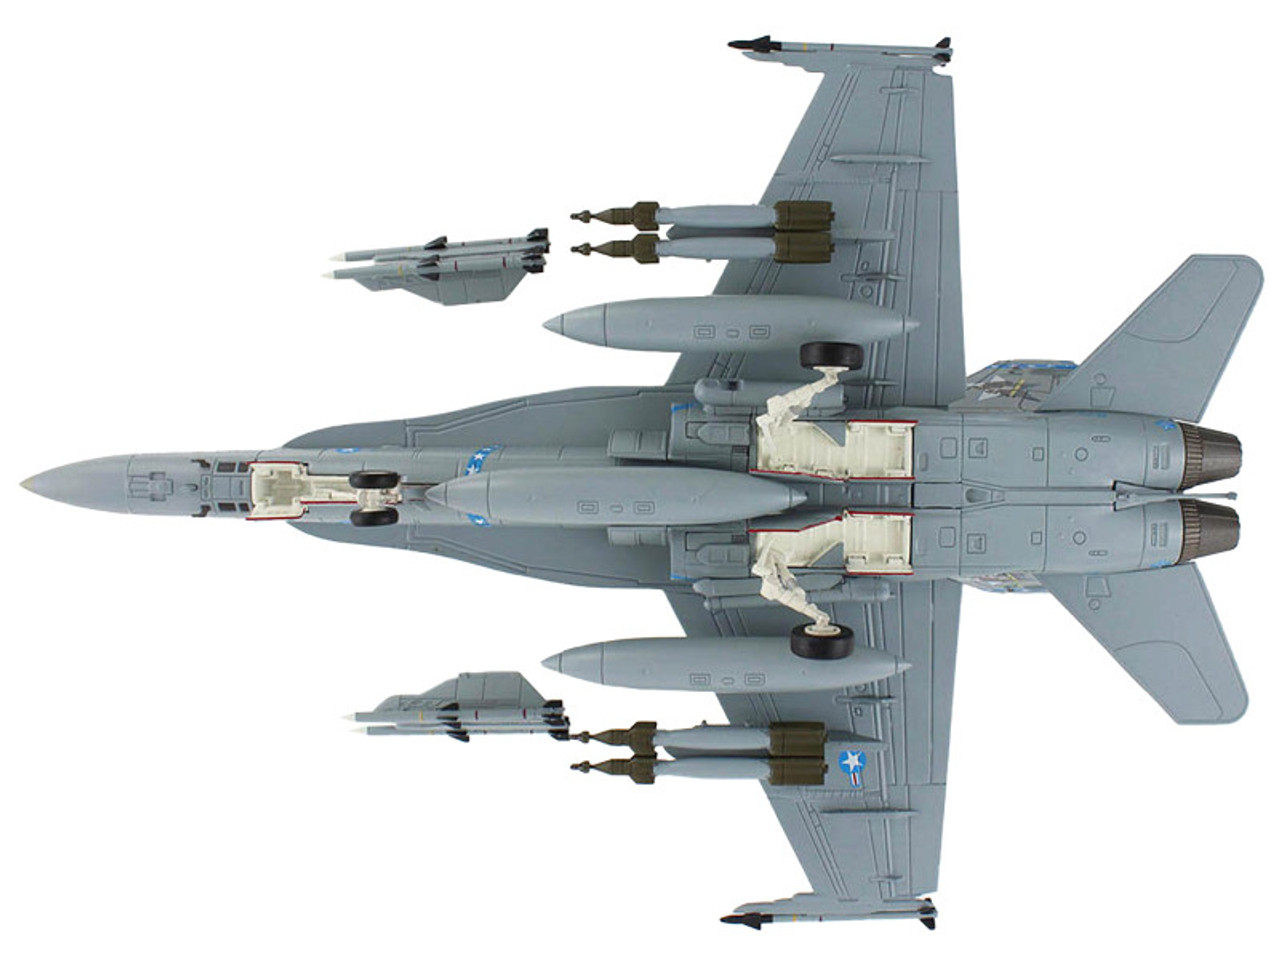 McDonnell Douglas F/A-18C Hornet Aircraft "VMFA-112 Cowboys" (2020) United States Marines "Air Power Series" 1/72 Diecast Model by Hobby Master